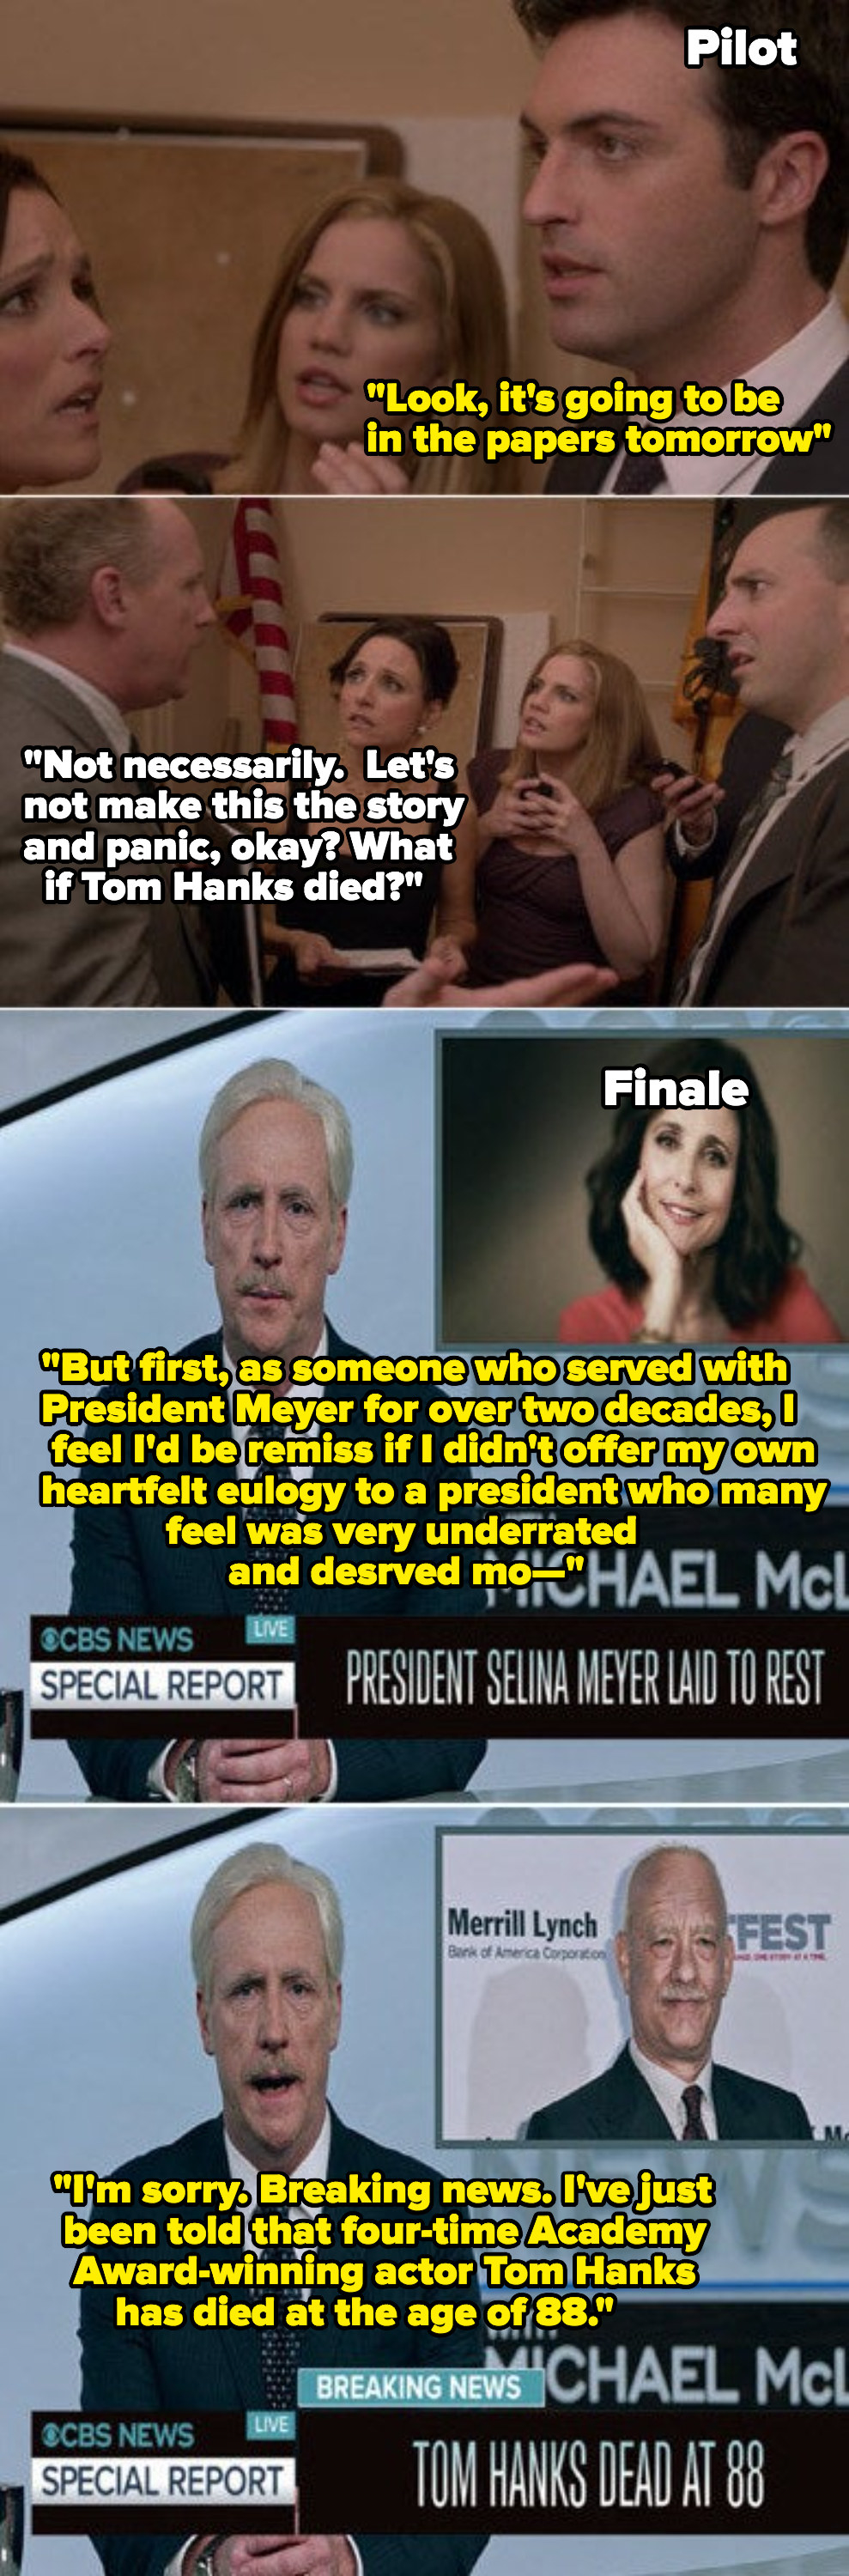 The news on TV about Selina&#x27;s death being interrupted with breaking news of Tom Hanks&#x27; death